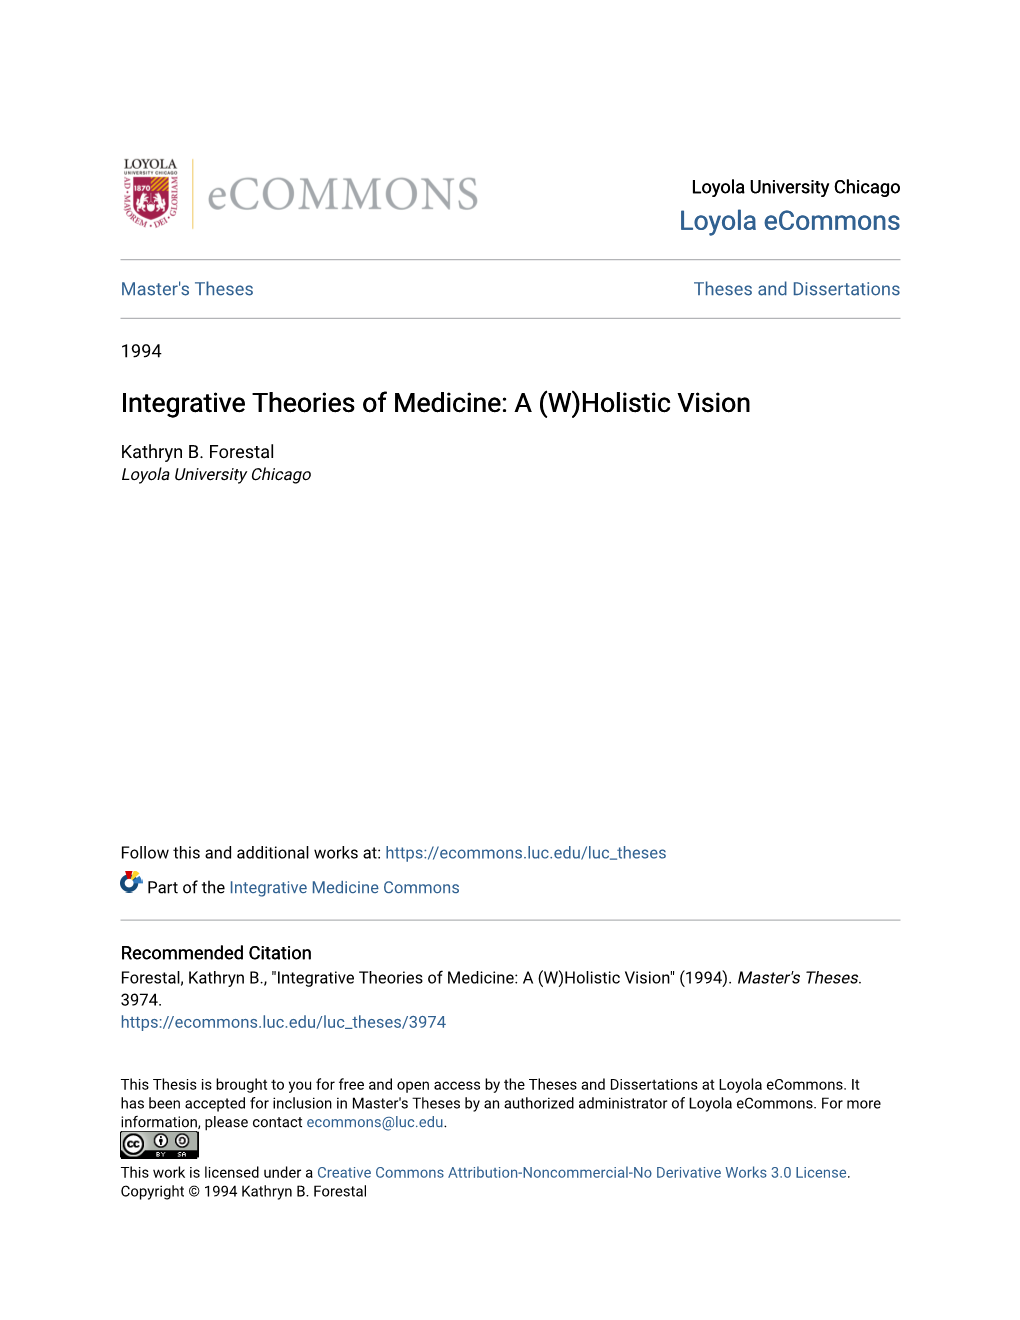 Integrative Theories of Medicine: a (W)Holistic Vision